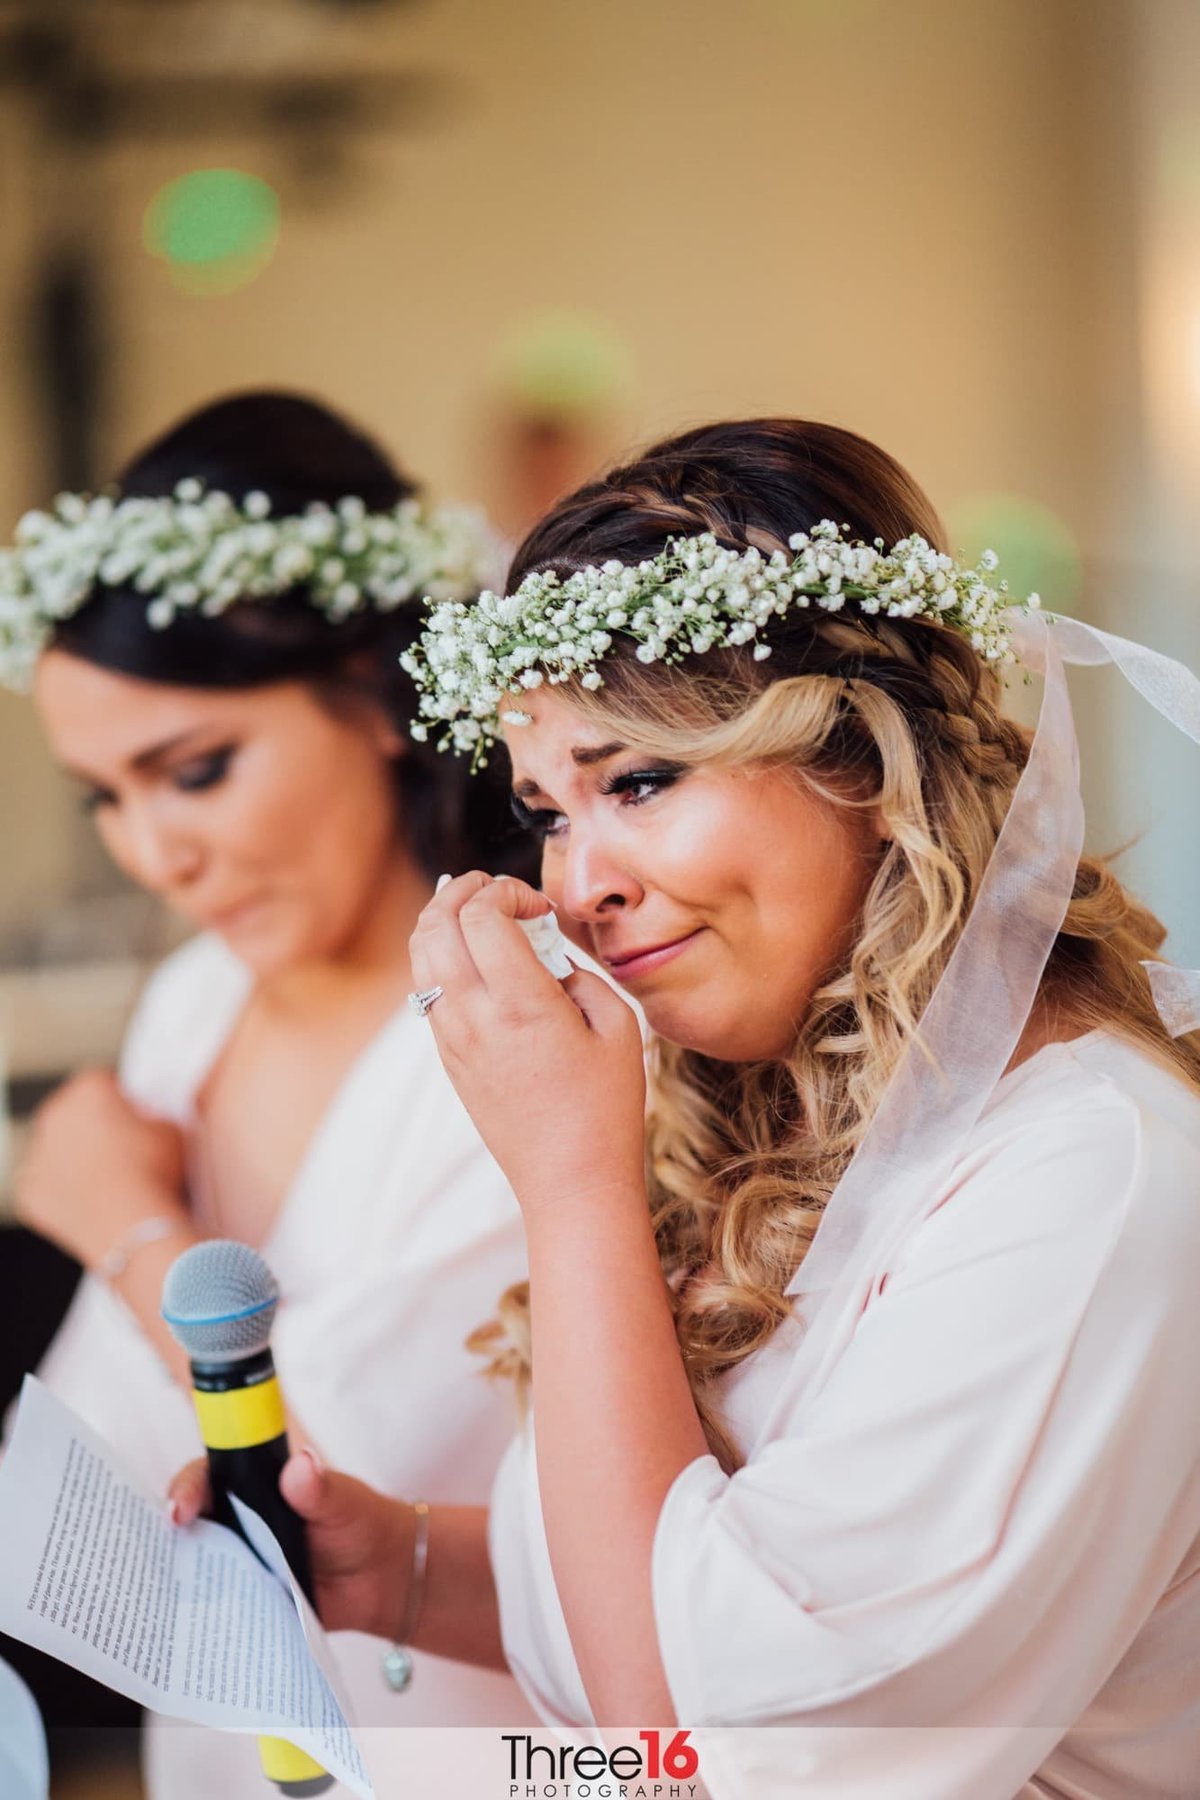 Maid of Honor sheds a tear while delivering her toast